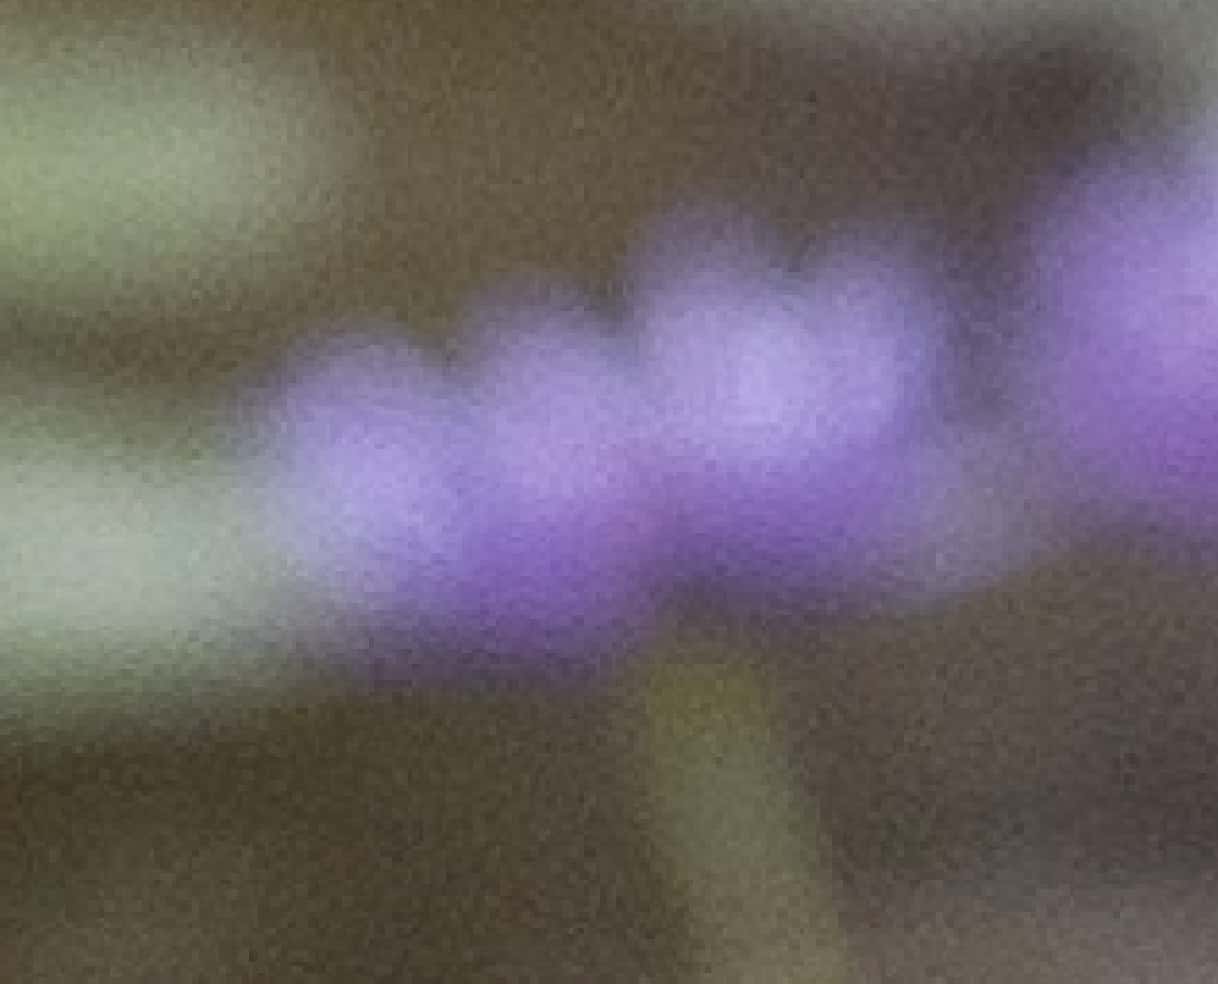 Blurry image of lavender flowers.